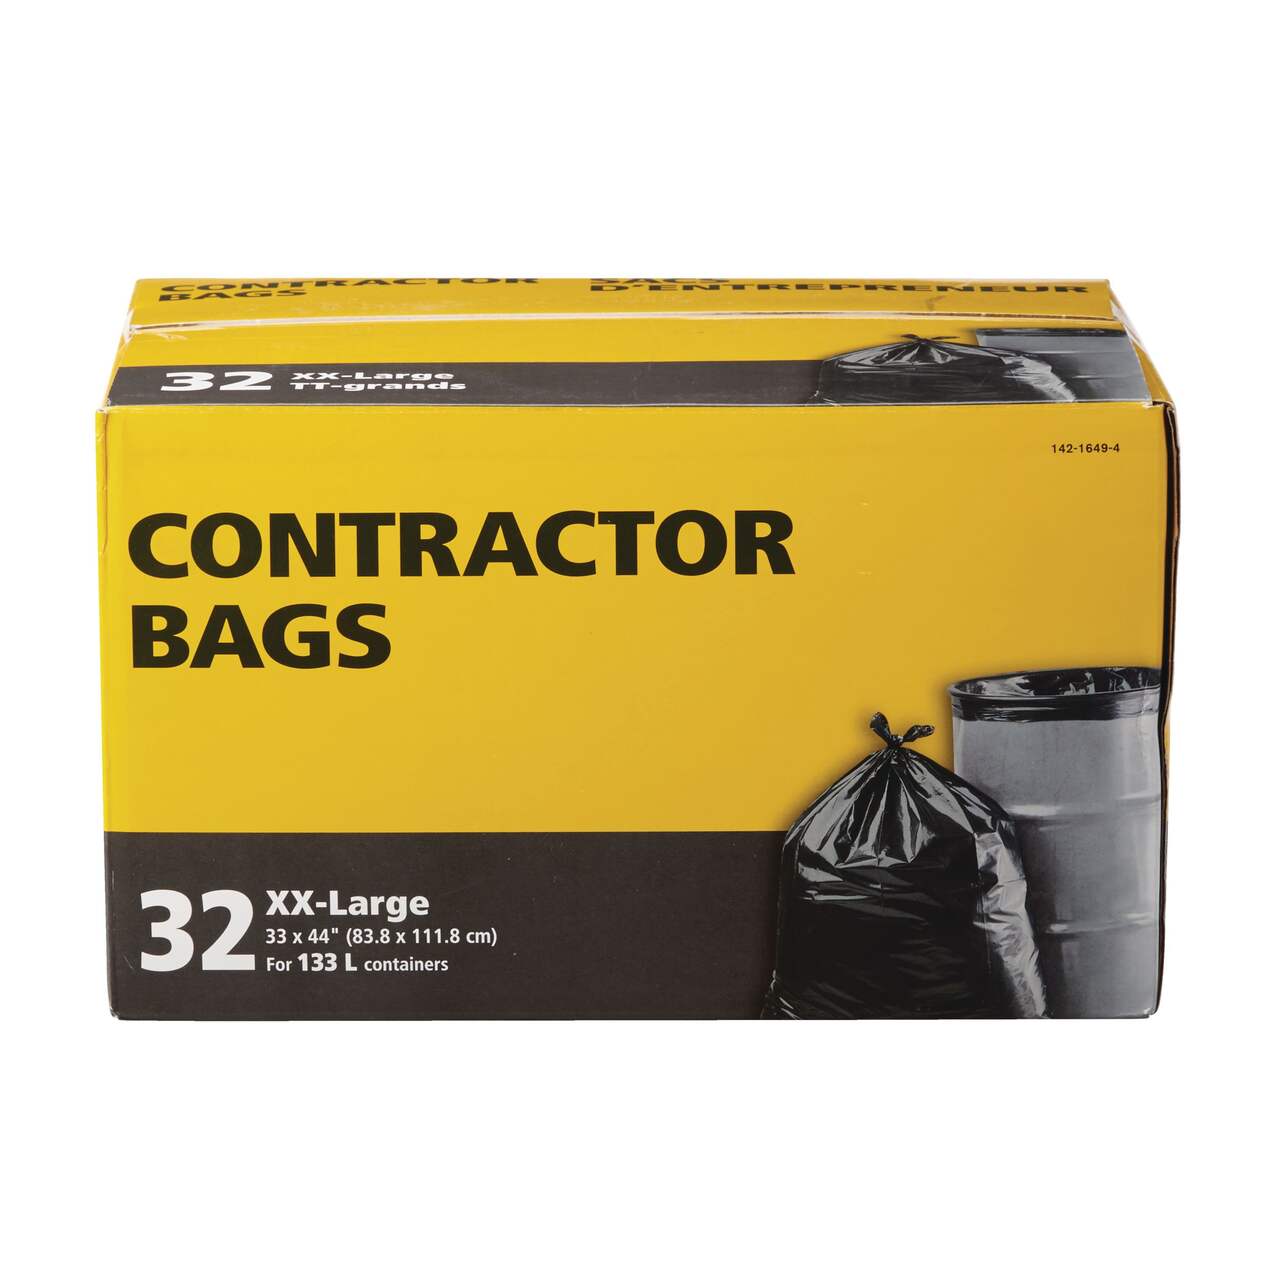 https://media-www.canadiantire.ca/product/living/cleaning/refuse-bags/1421649/133-litres-contractor-bags-32-count-c3ef26b6-603f-4103-8aa1-f22eea82f4d1-jpgrendition.jpg?imdensity=1&imwidth=640&impolicy=mZoom